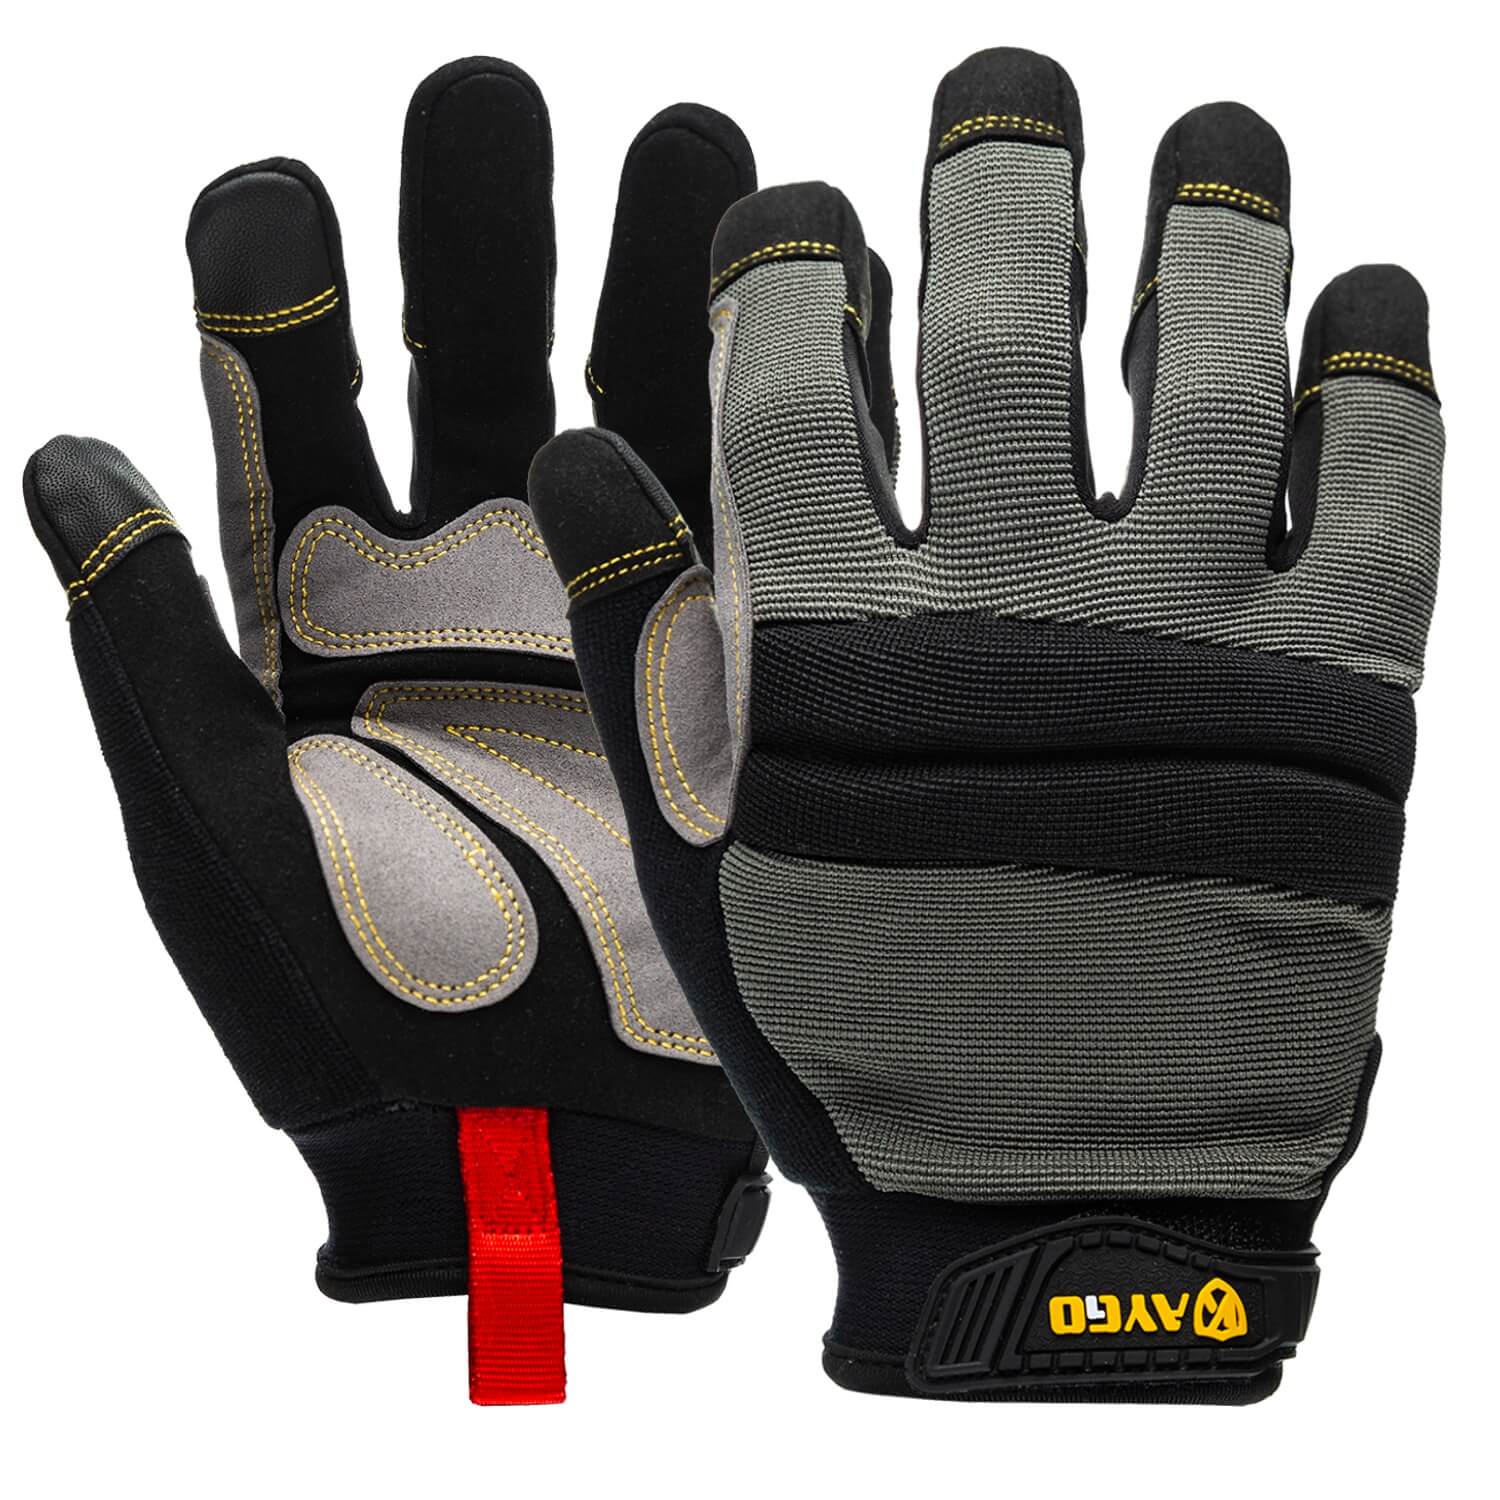 Touchscreen Mechanic Gloves with Reinforced Synthetic Leather on Palm